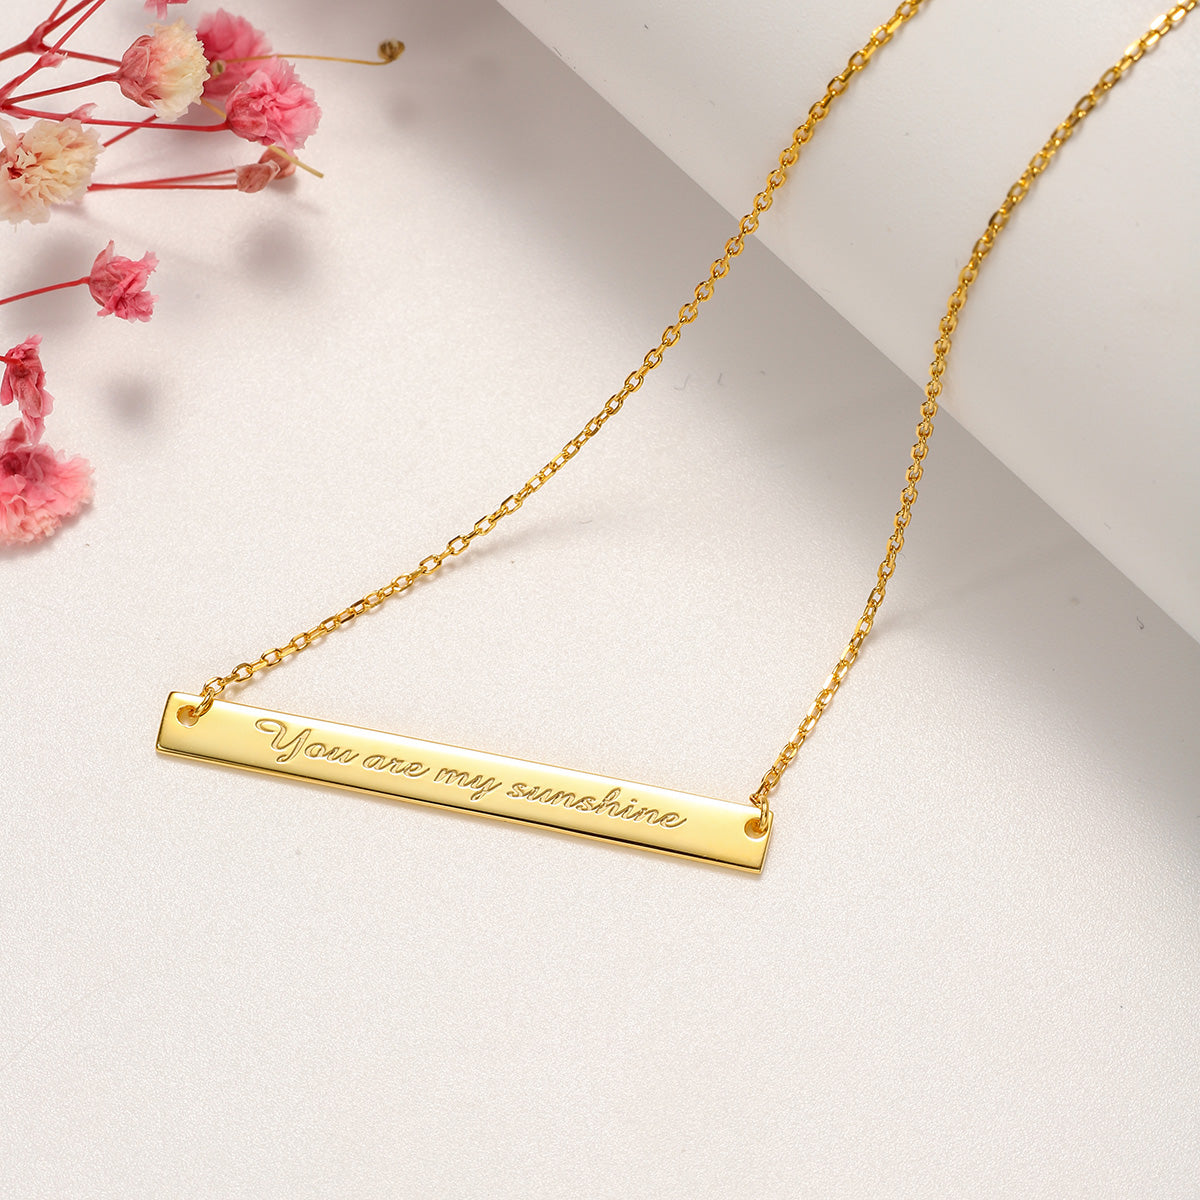 Serif Custom Sentence Tag Chain Chic Necklace